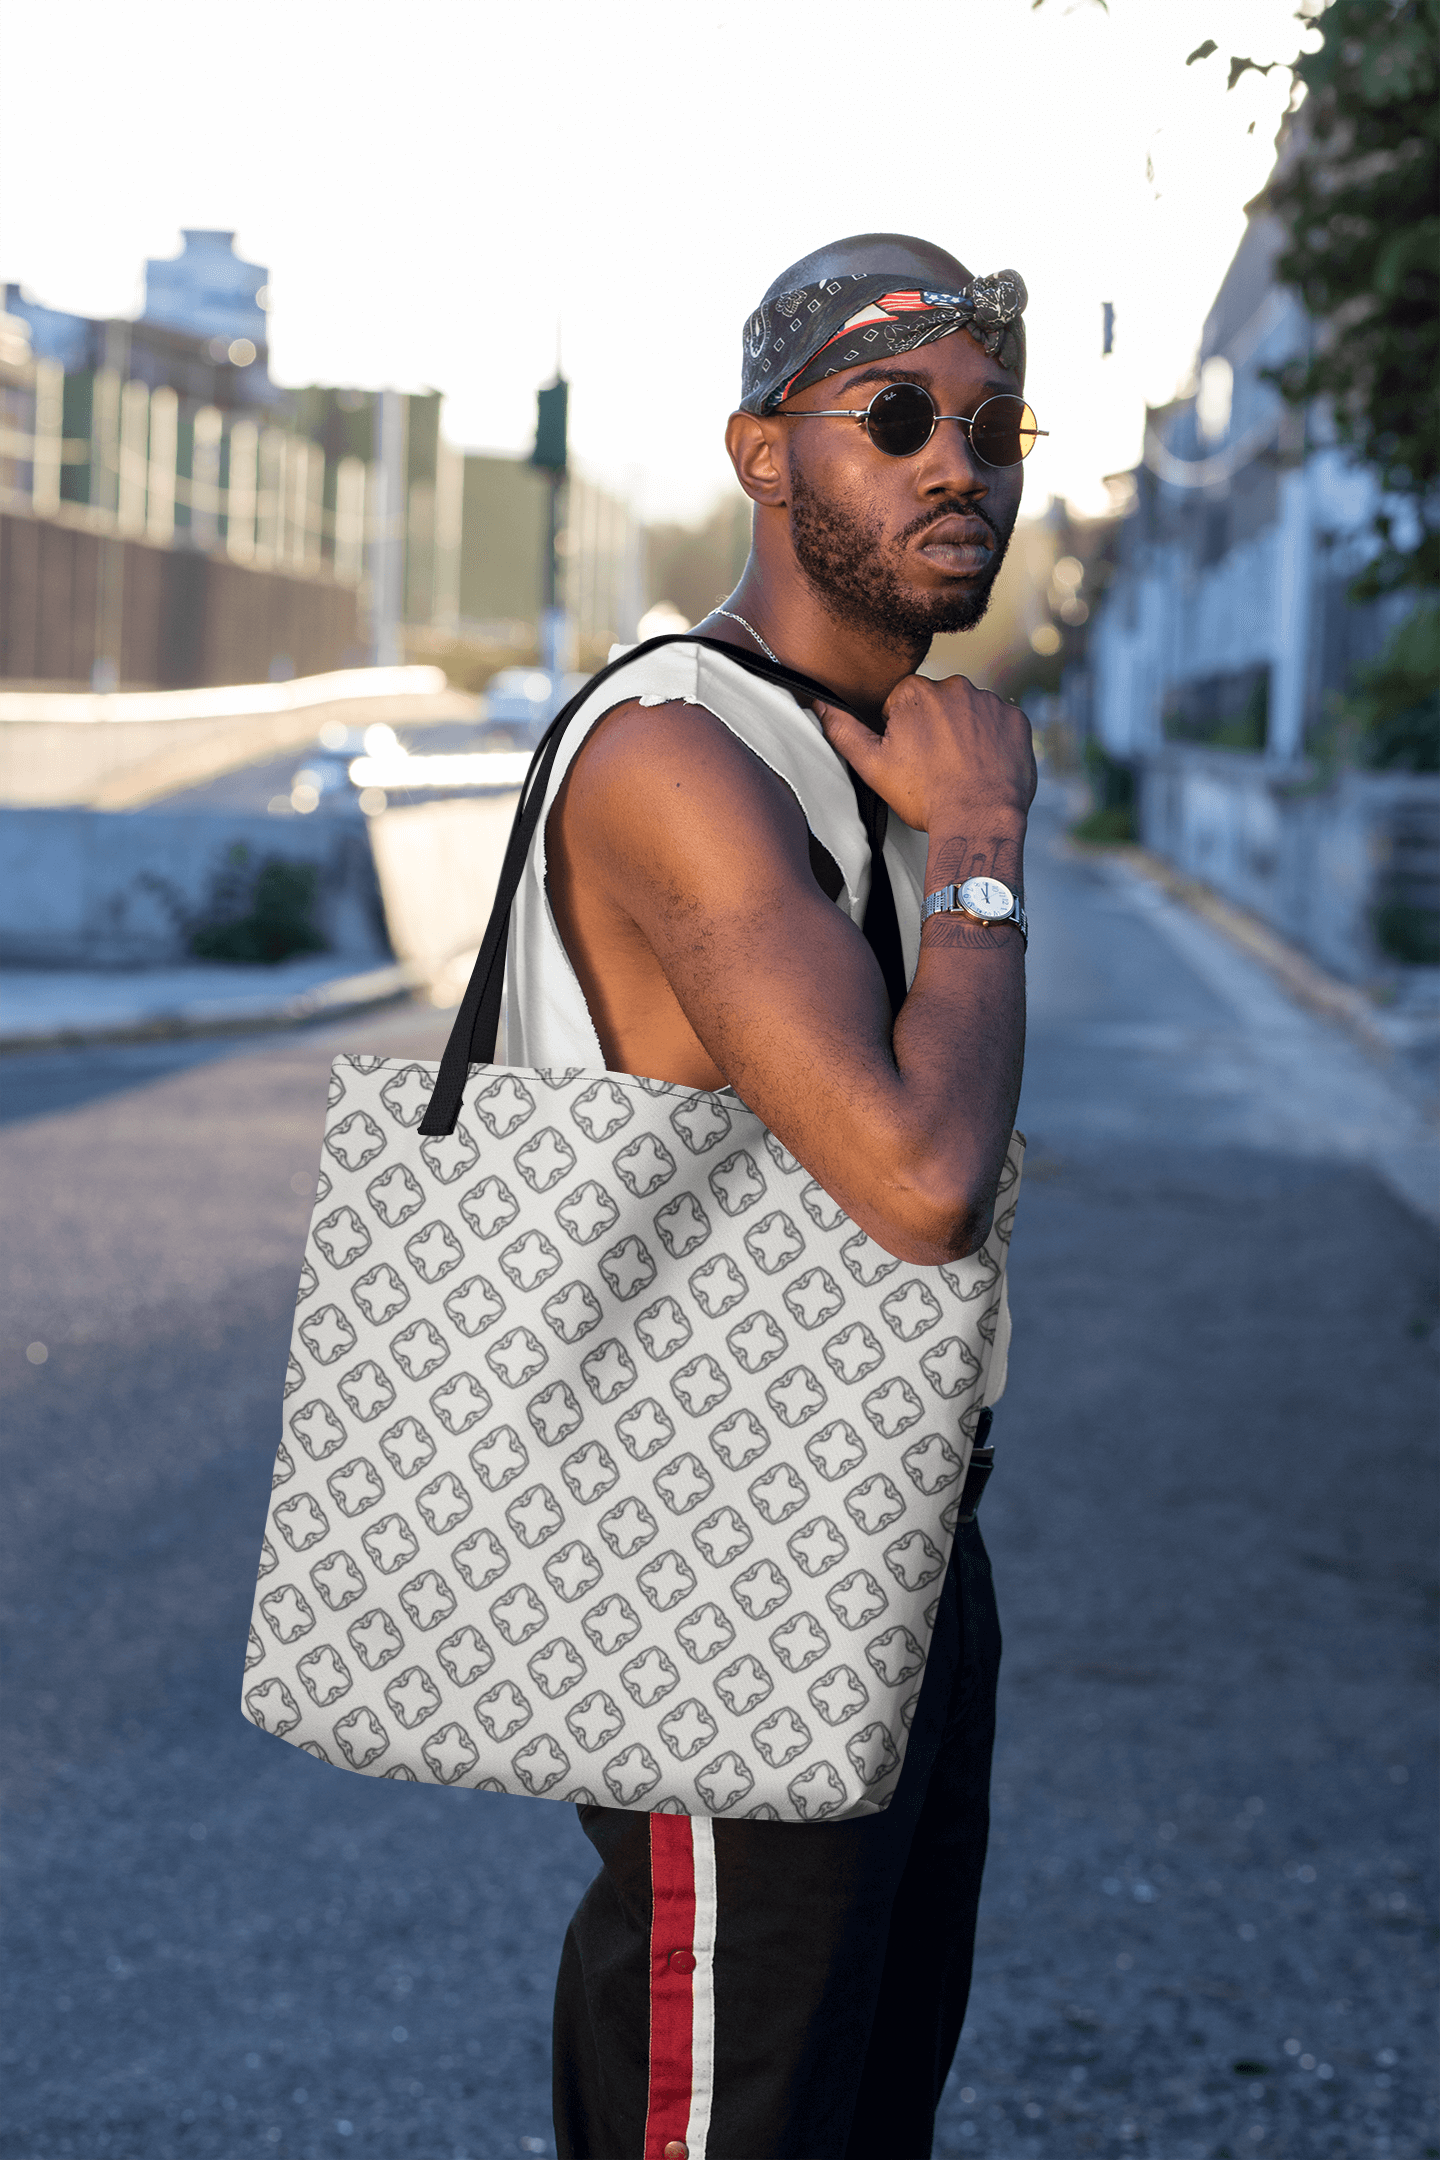 Anderson Patterned Tote Shopper Bag Bags - Shopping bags A Moment Of Now Women’s Boutique Clothing Online Lifestyle Store